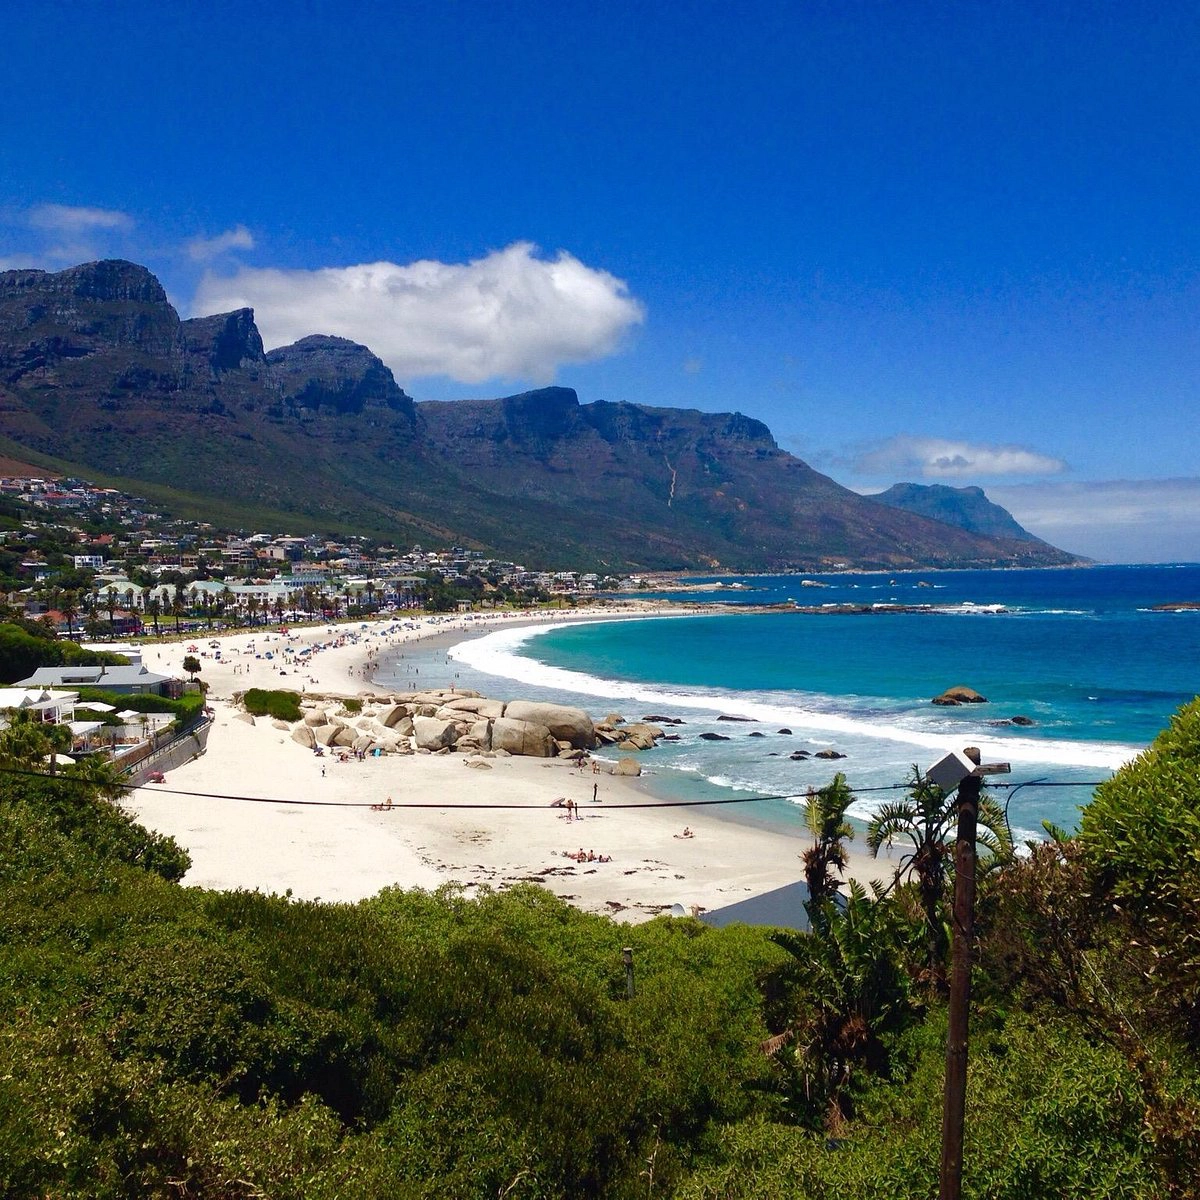  Camps Bay  strand - South African Atlantic Coast